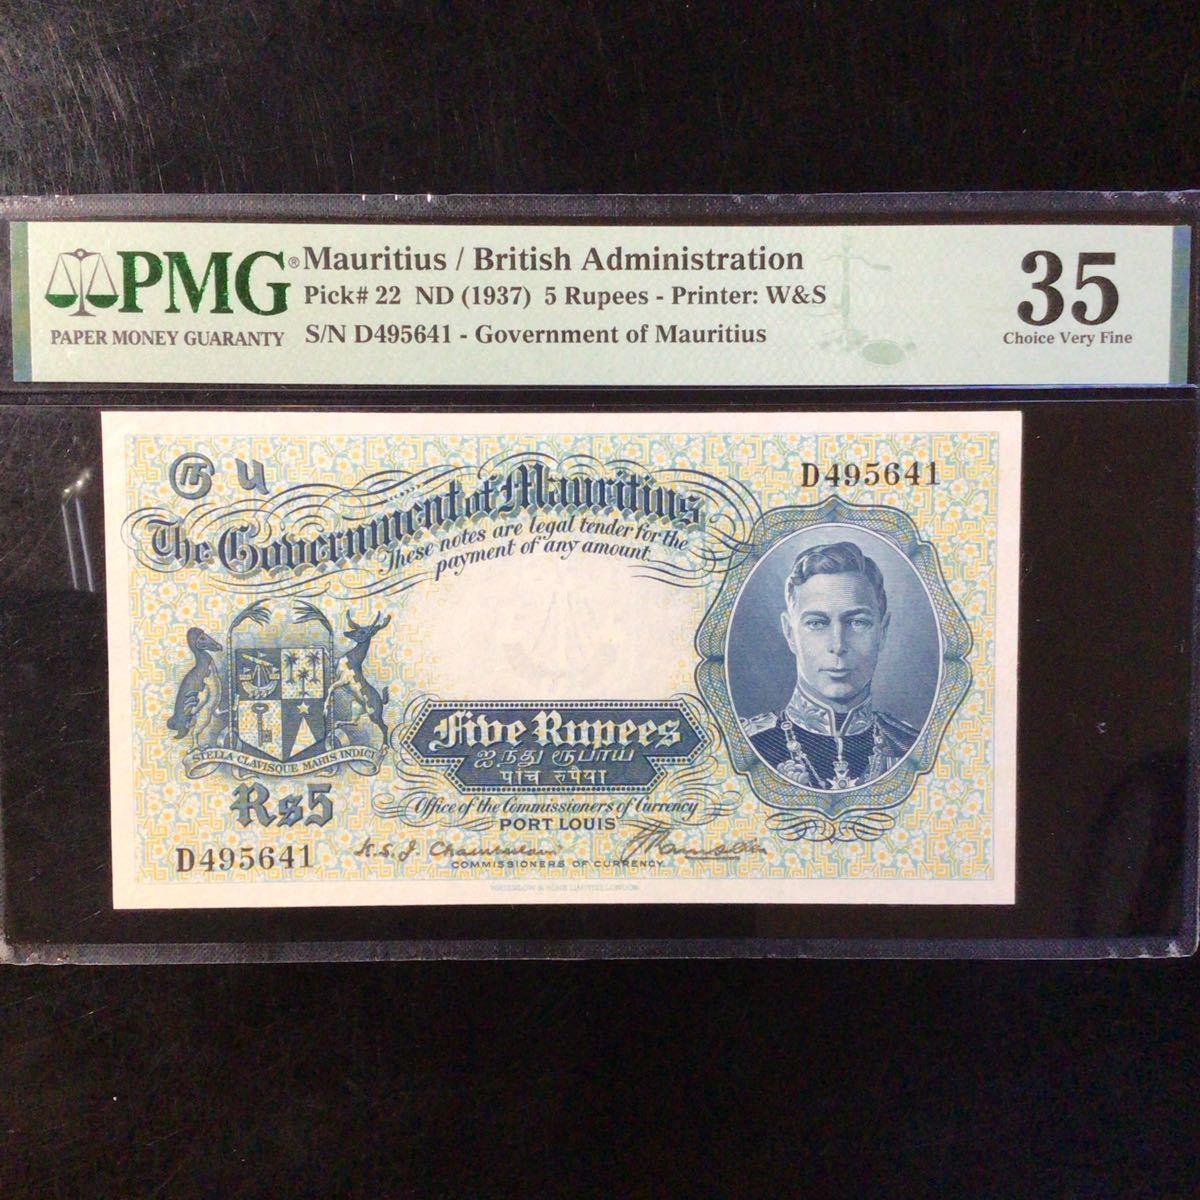 World Banknote Grading MAURITIUS《British Administration》5 Rupees【1937】『PMG Grading Choice Very Fine 35』_画像1